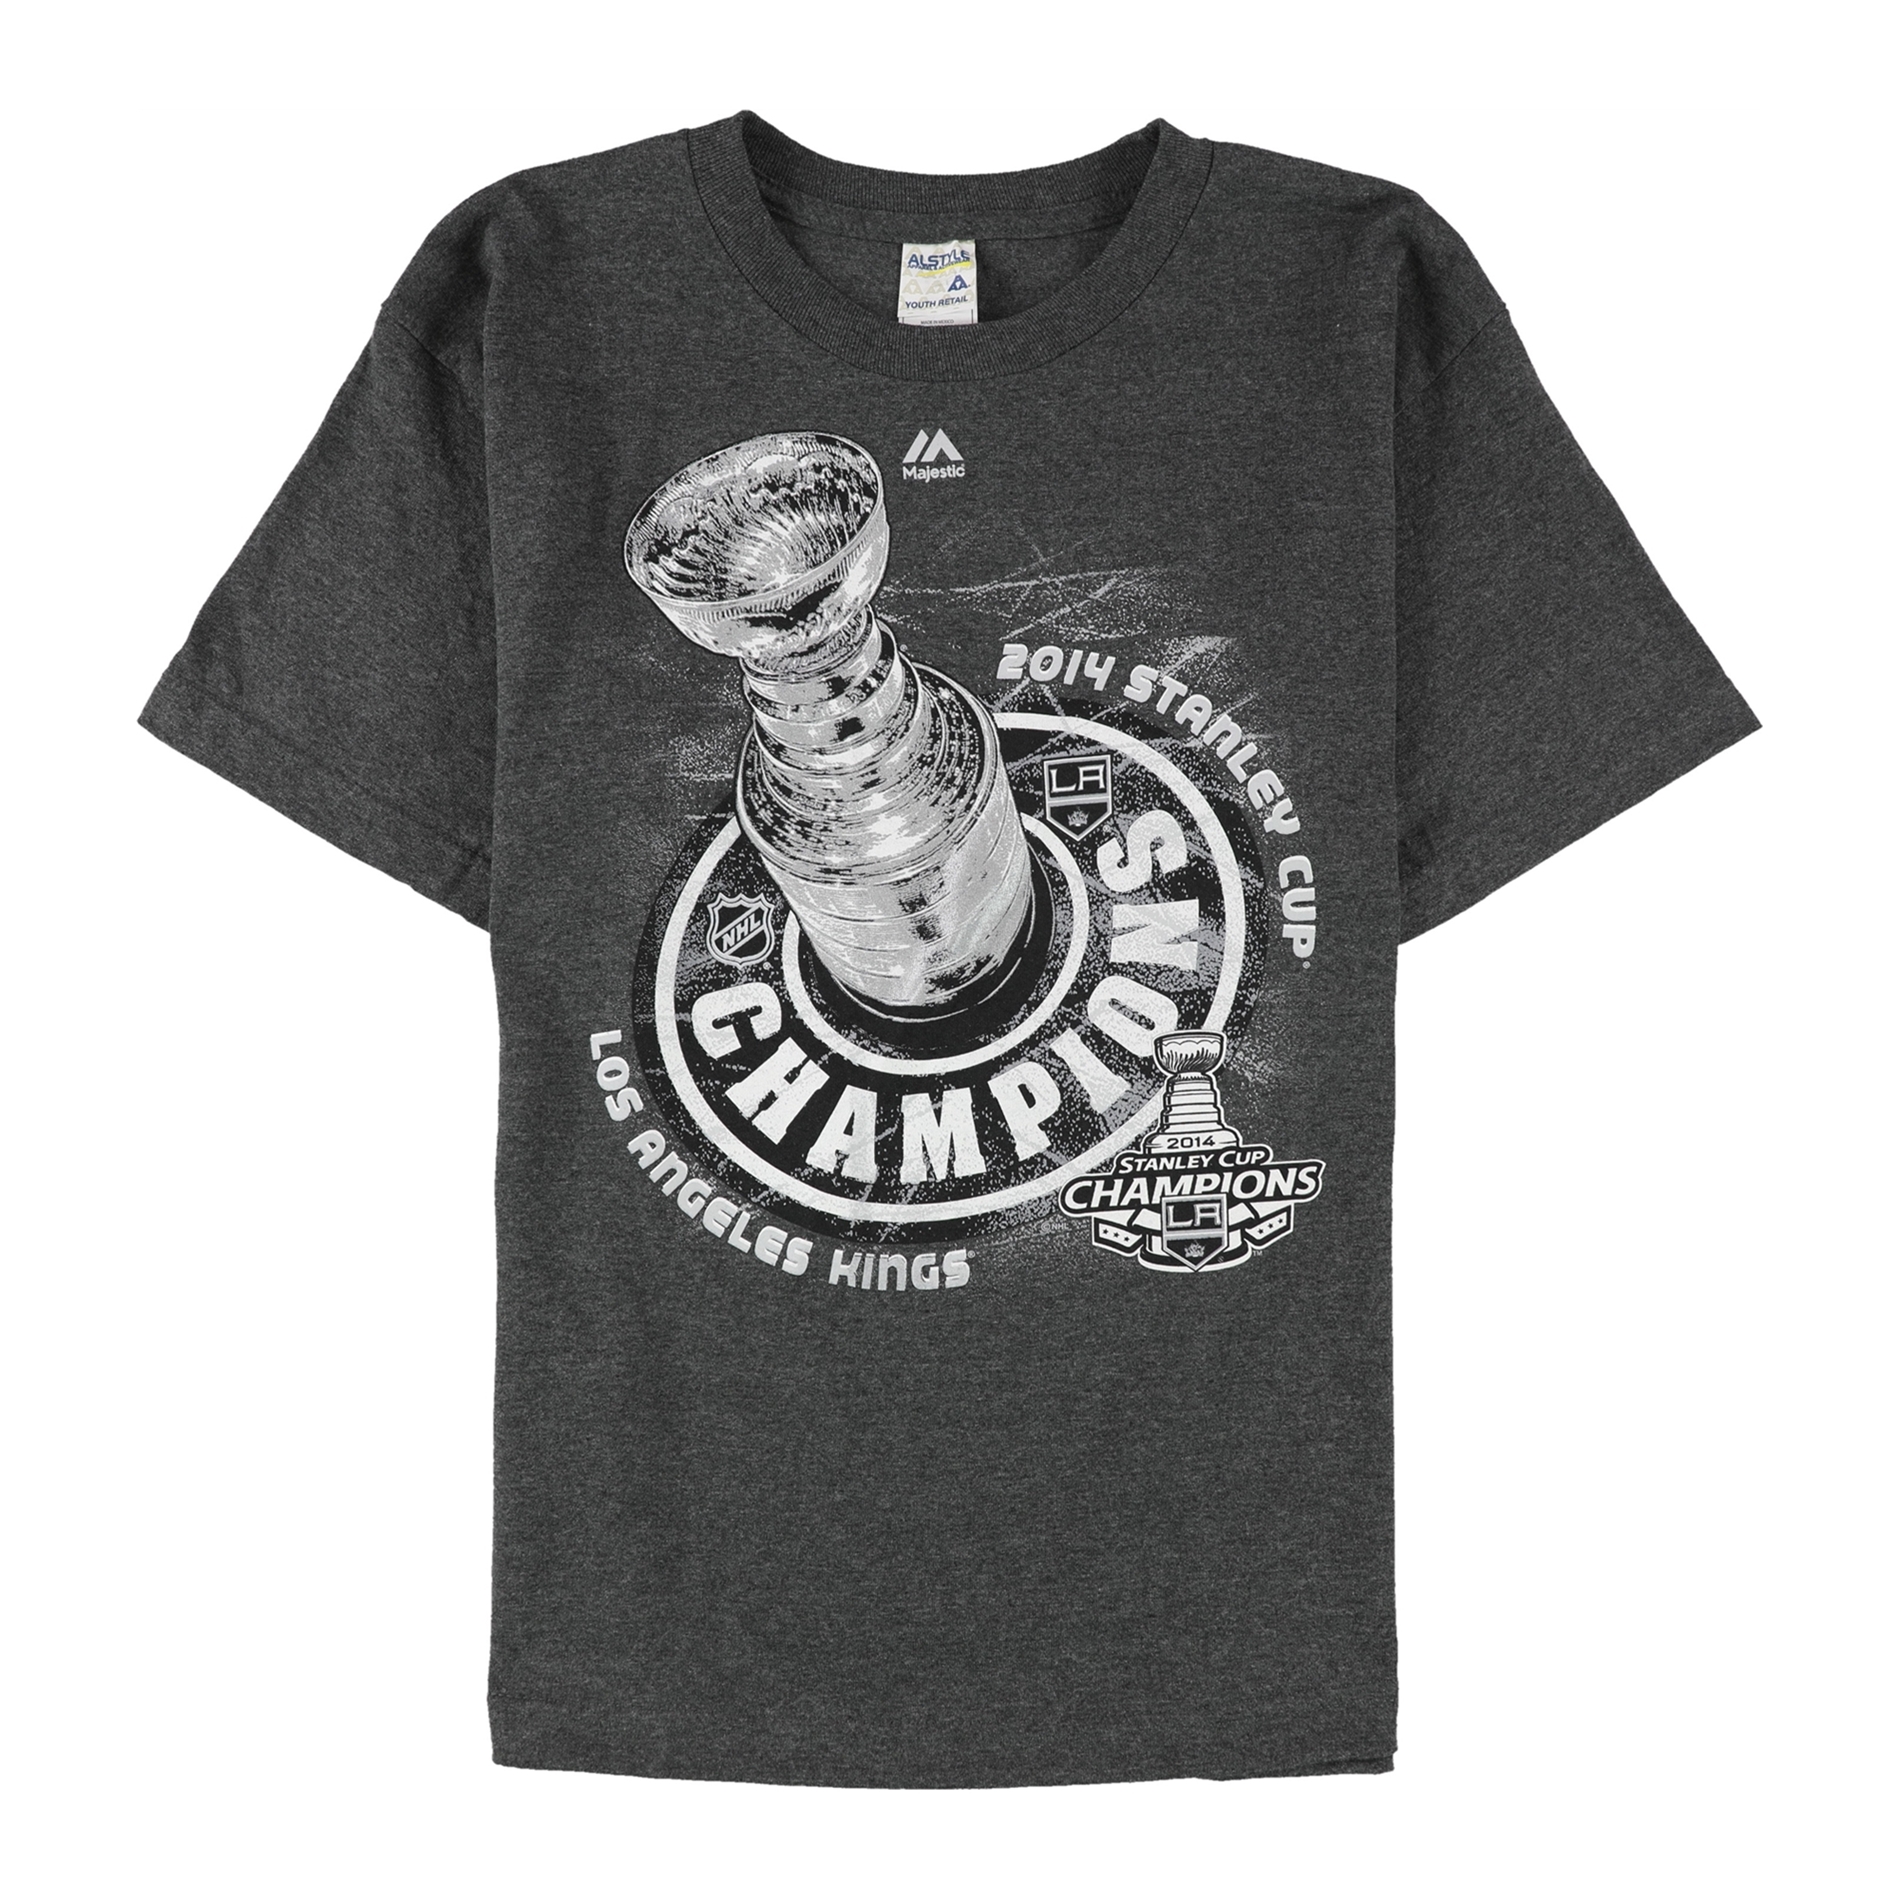 Majestic Boys 2014 Stanley Cup Champions Graphic T-Shirt